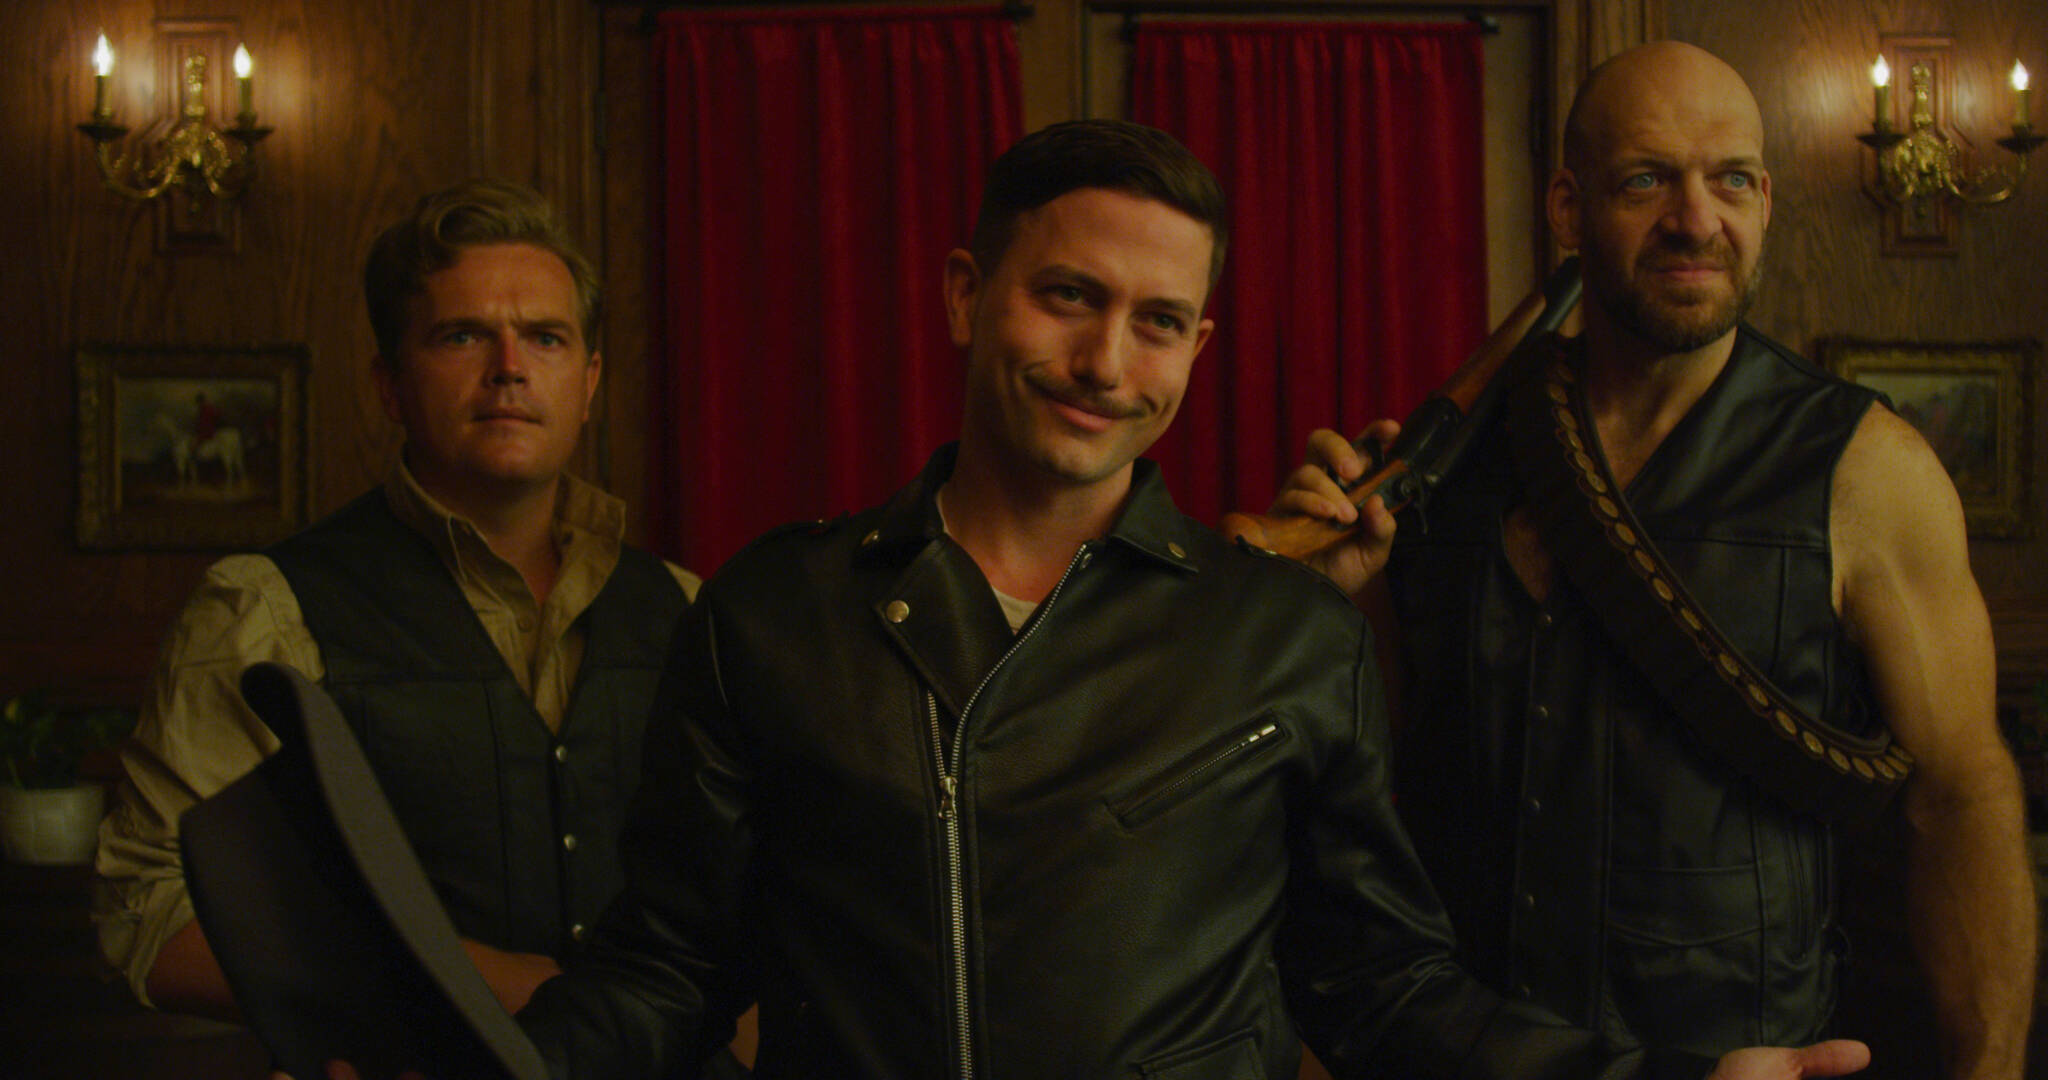 Jackson Rathbone as Fritz Ziegler alongside Nazi henchmen in “Condor's Nest,” in theaters, on demand and digitally released Friday.  (Courtesy photo/PMKBNC)